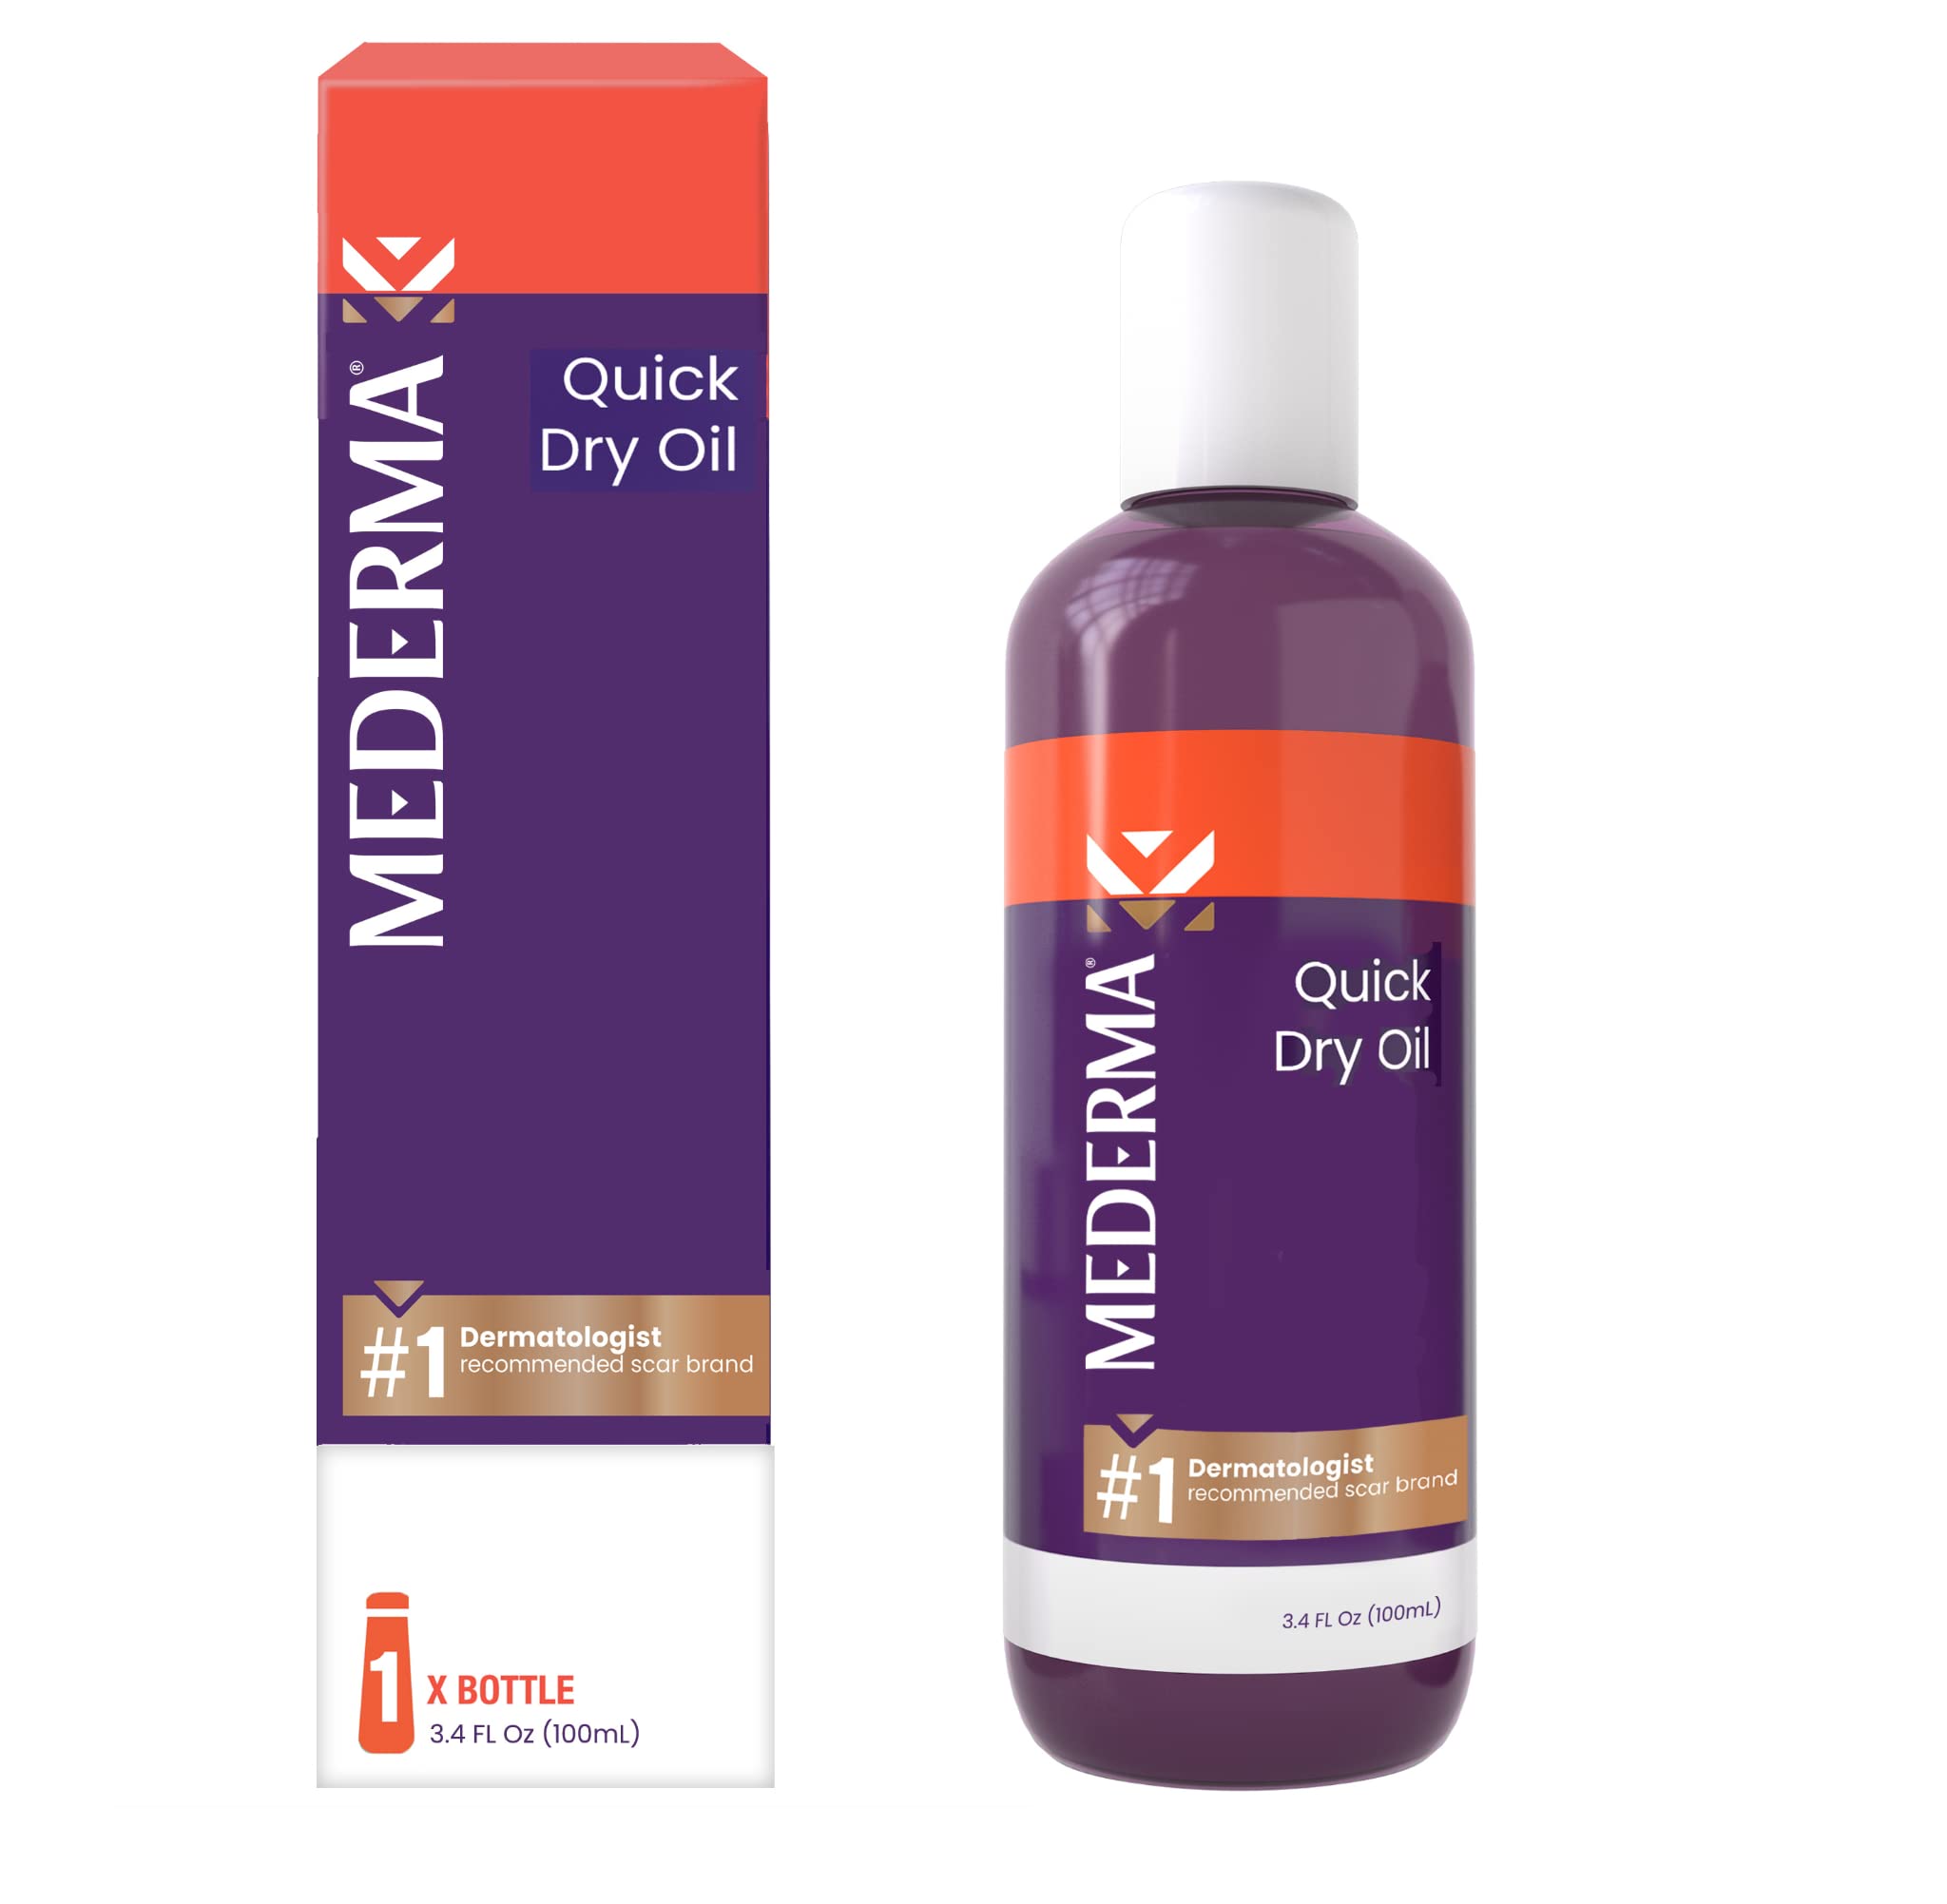 Mederma PM Intensive Overnight Scar Cream, Works with Skin's Nighttime Regenerative Activity & Quick Dry Oil, Scar and Stretch Mark Treatment